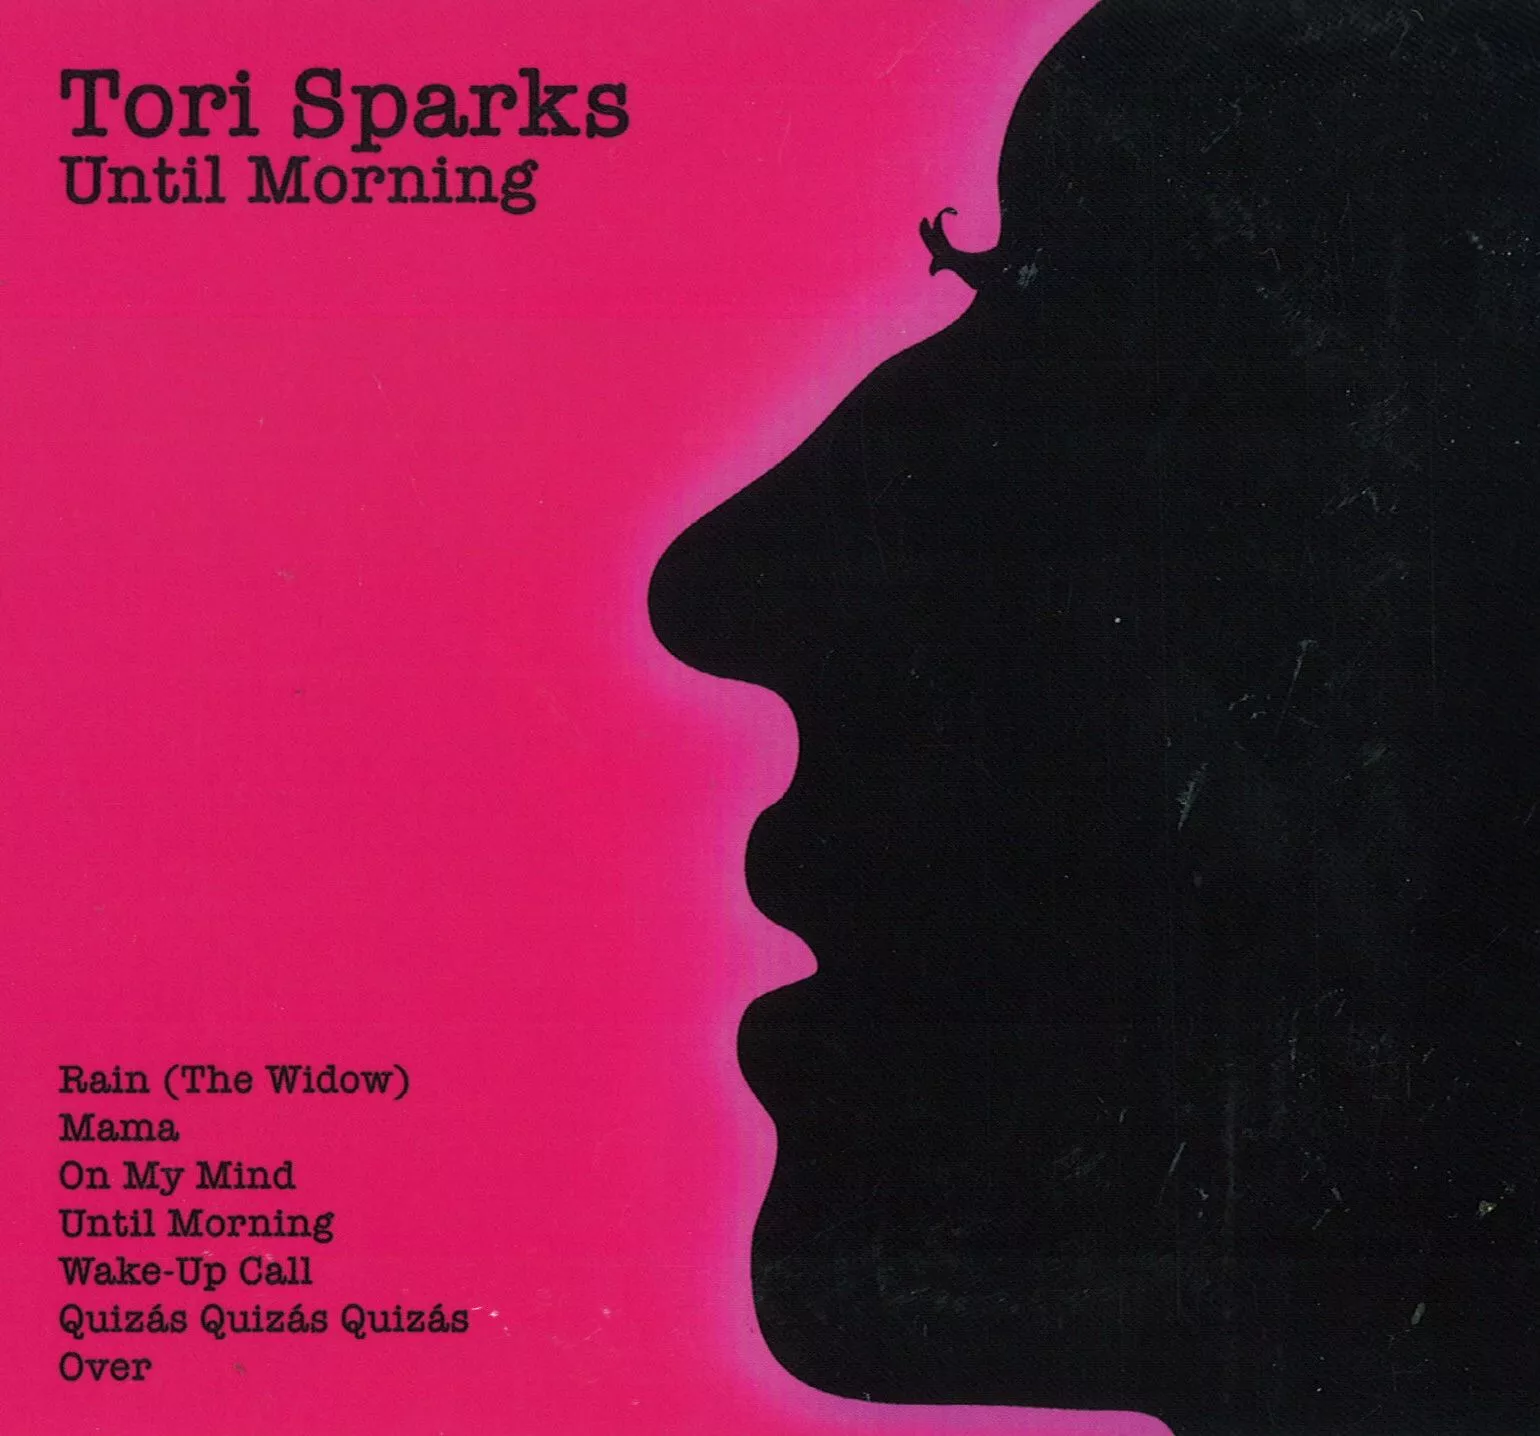 Until morning / Come out of the dark - Tori Sparks